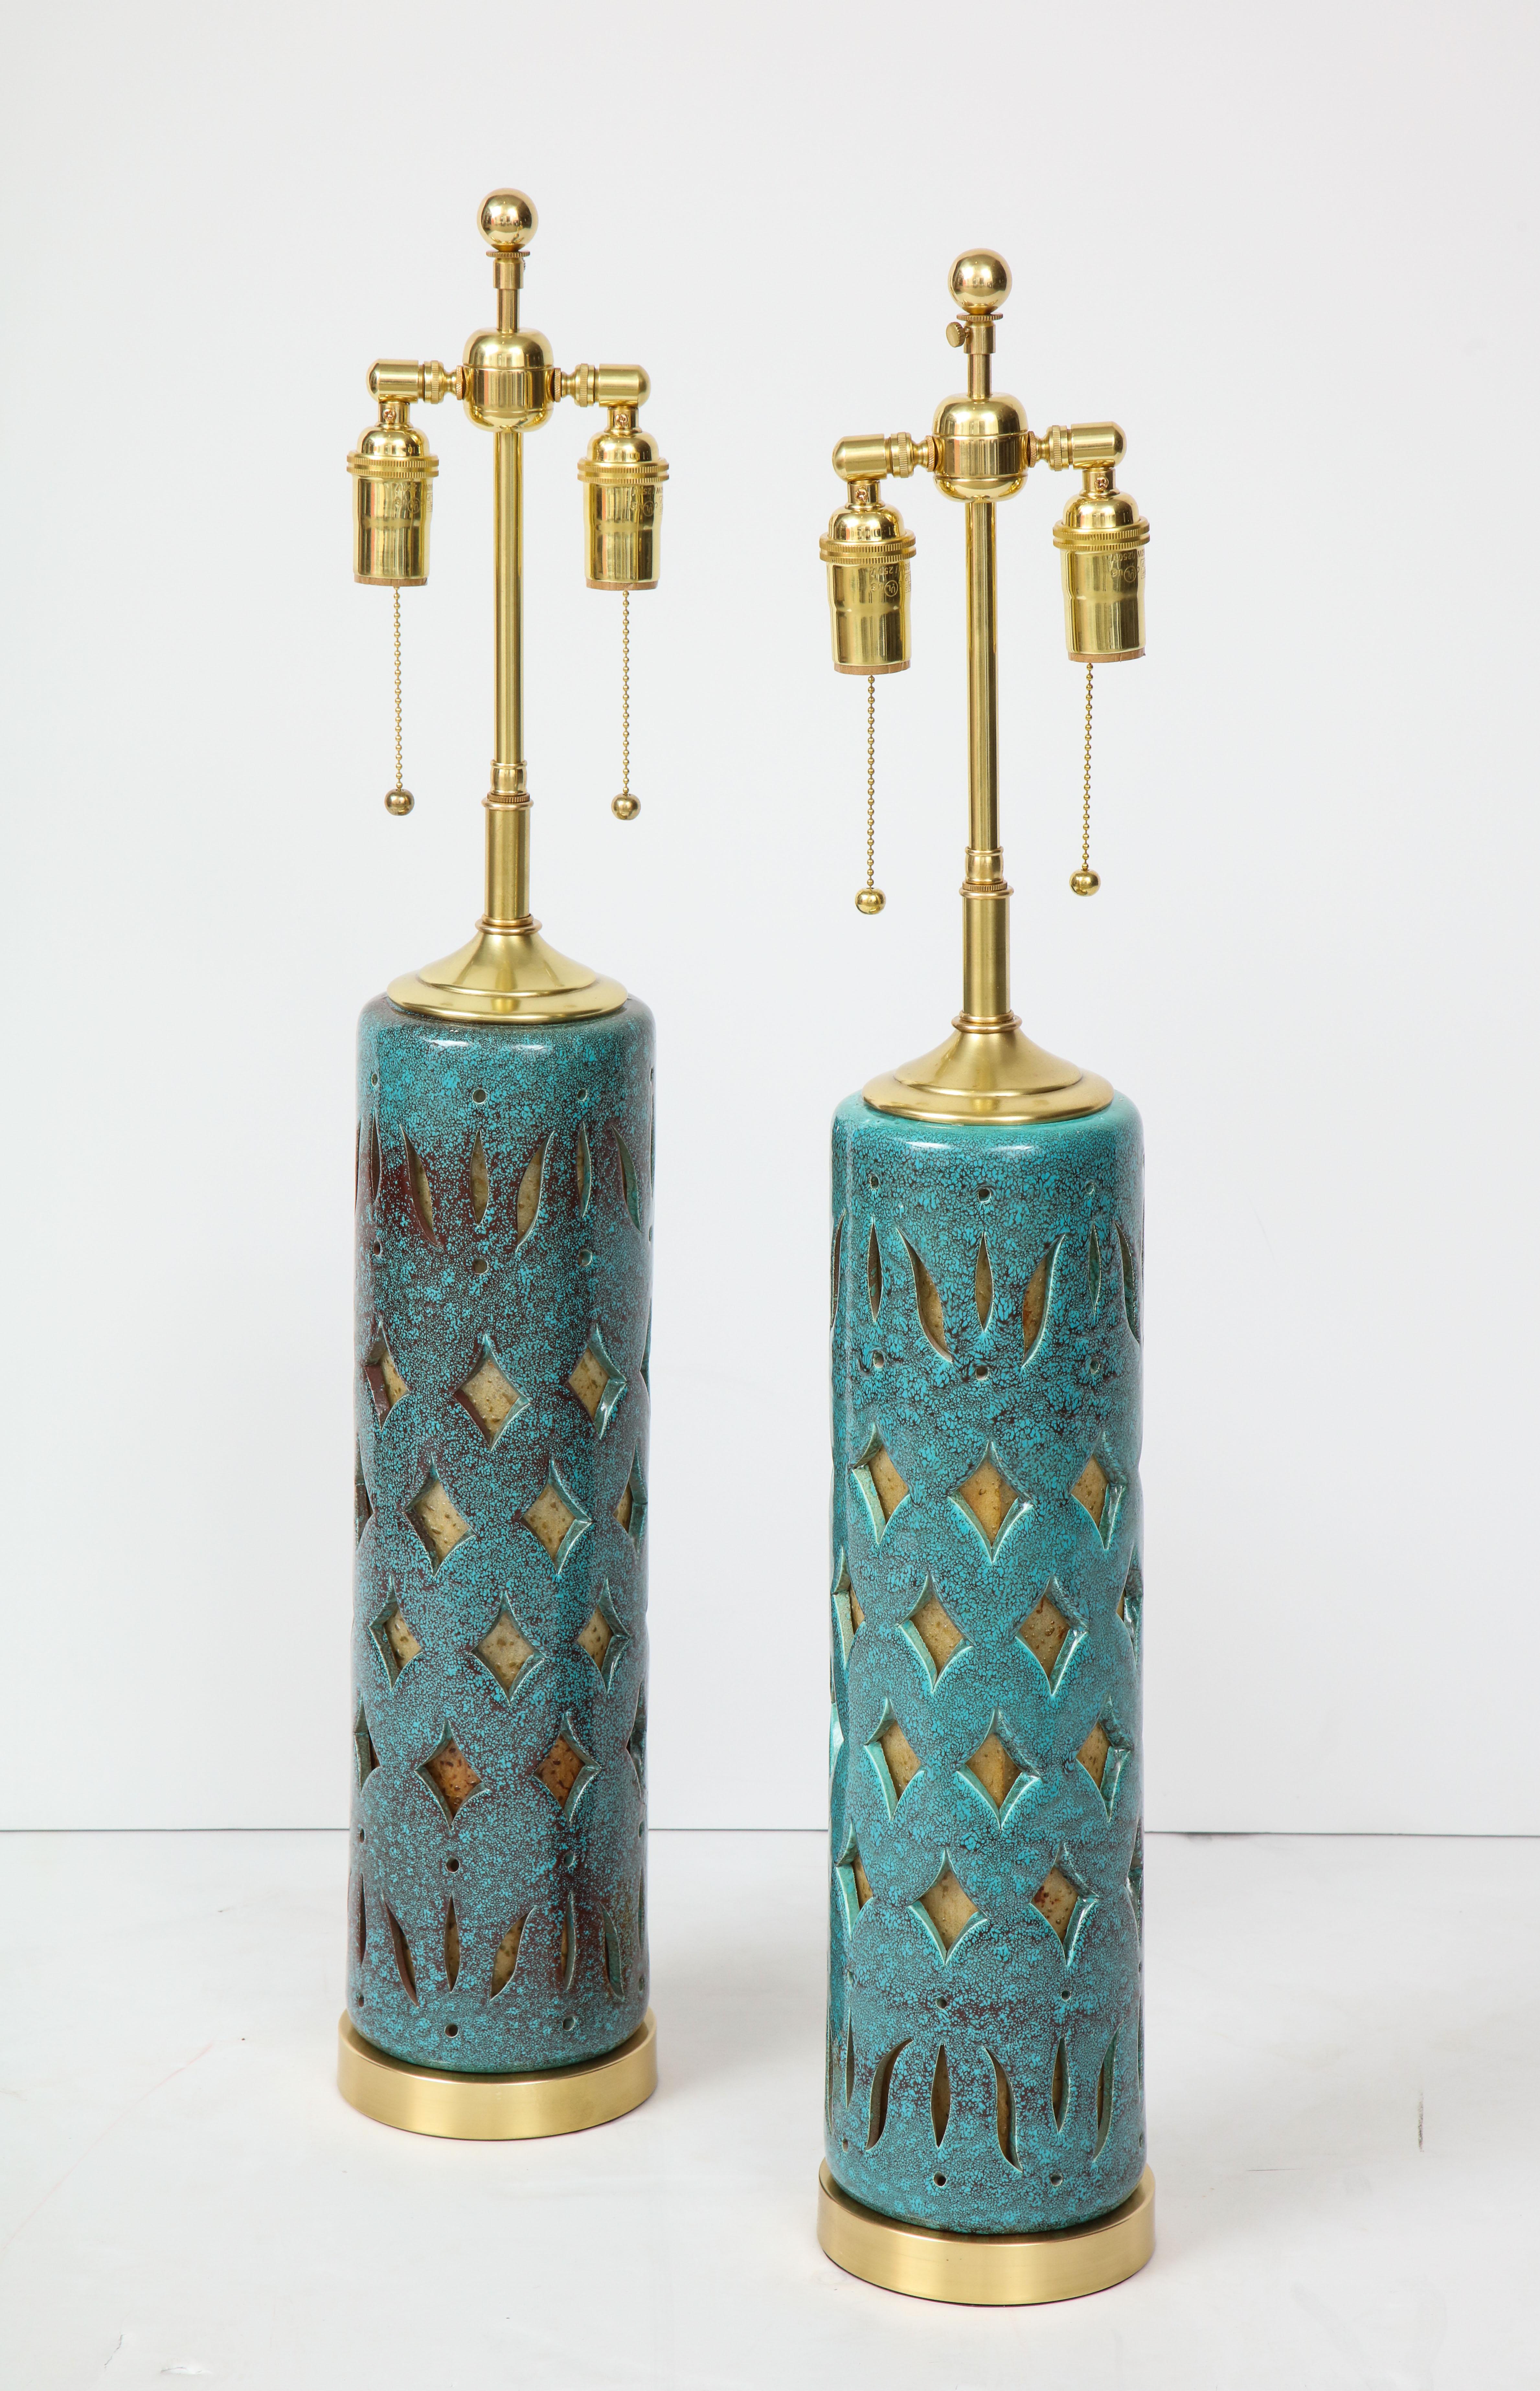 Pair of 1960s Italian ceramic lamps with a pierced cut out design and
a beautiful teal glazed finish.
The lamps have been newly rewired with polished brass double clusters.